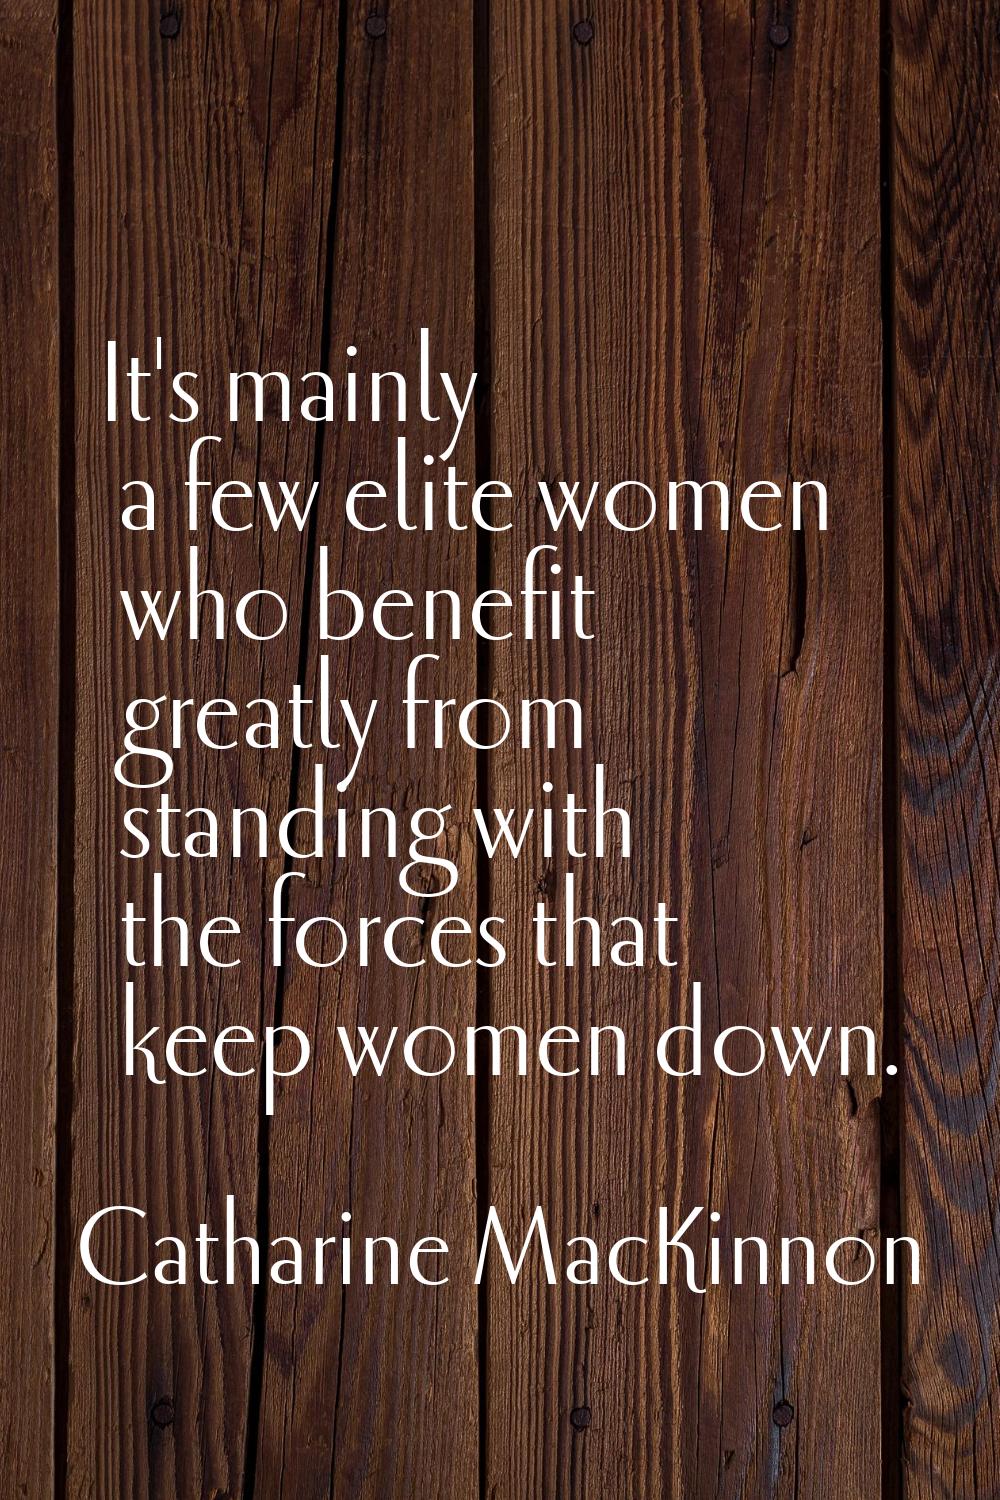 It's mainly a few elite women who benefit greatly from standing with the forces that keep women dow